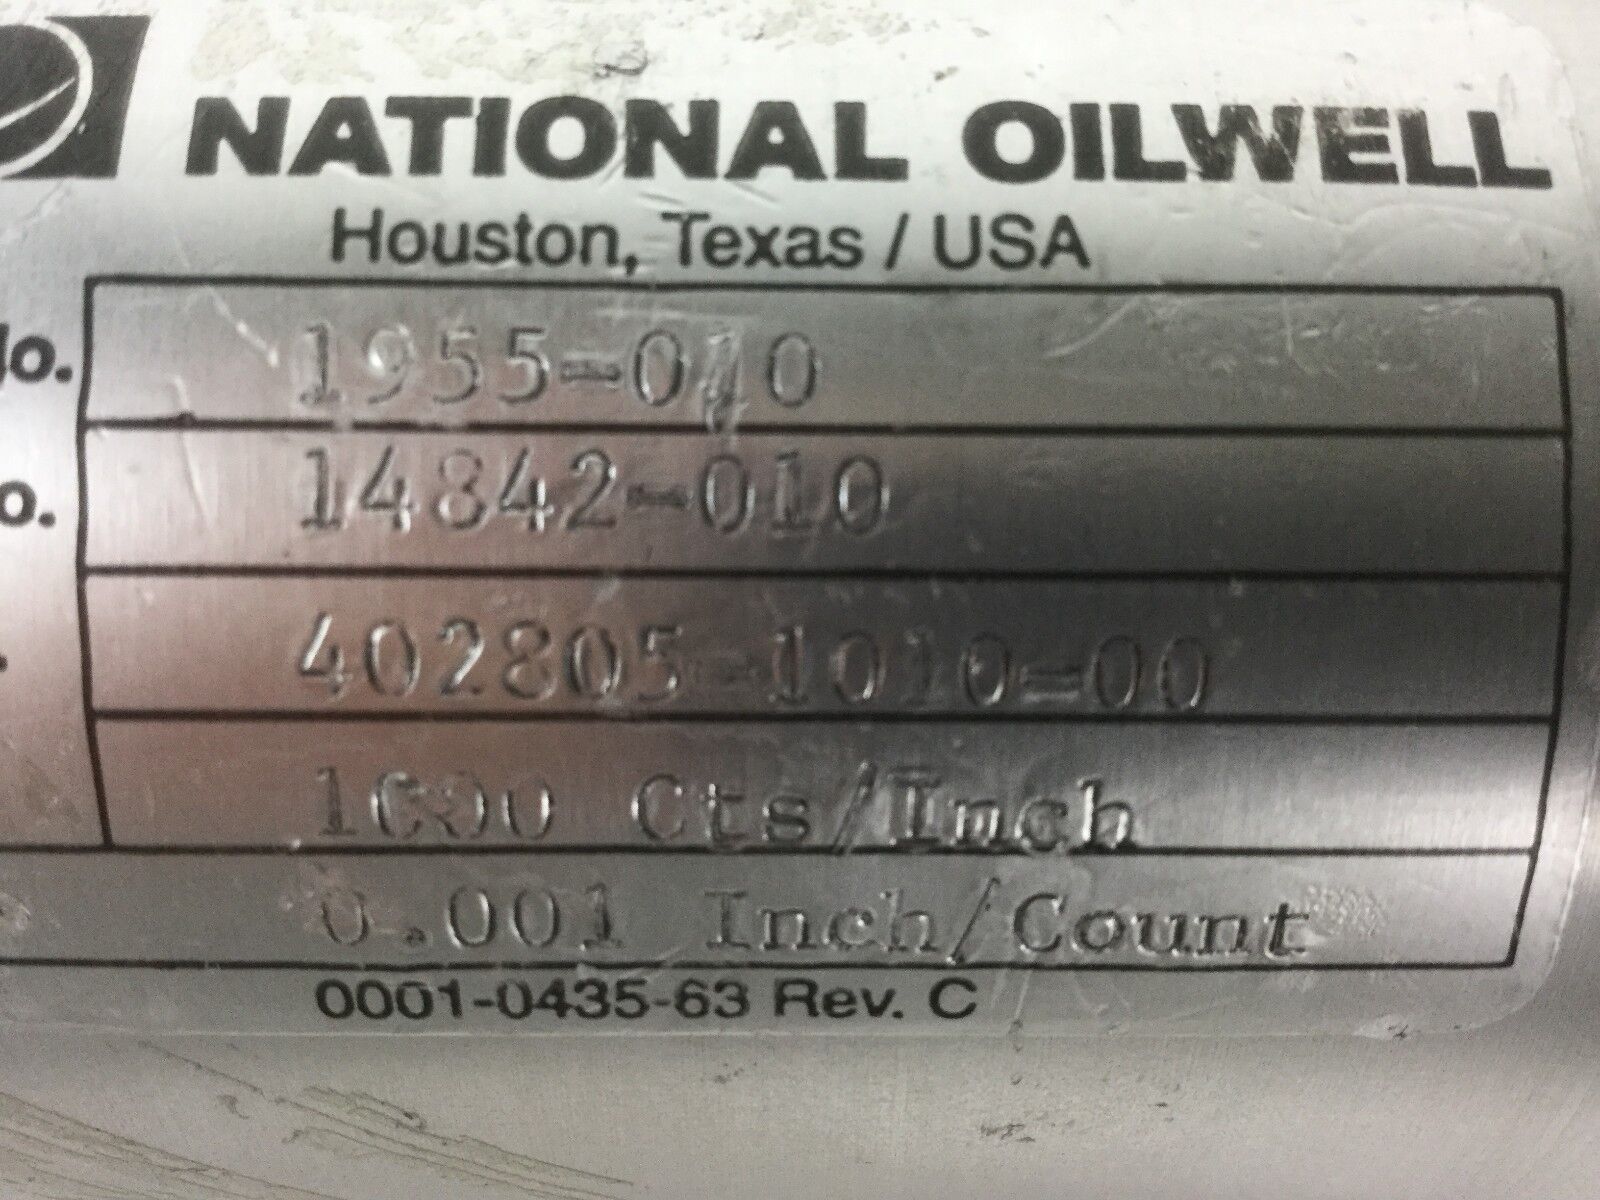 National Oilwell, 1955-010, Seals are in Tact, Untested